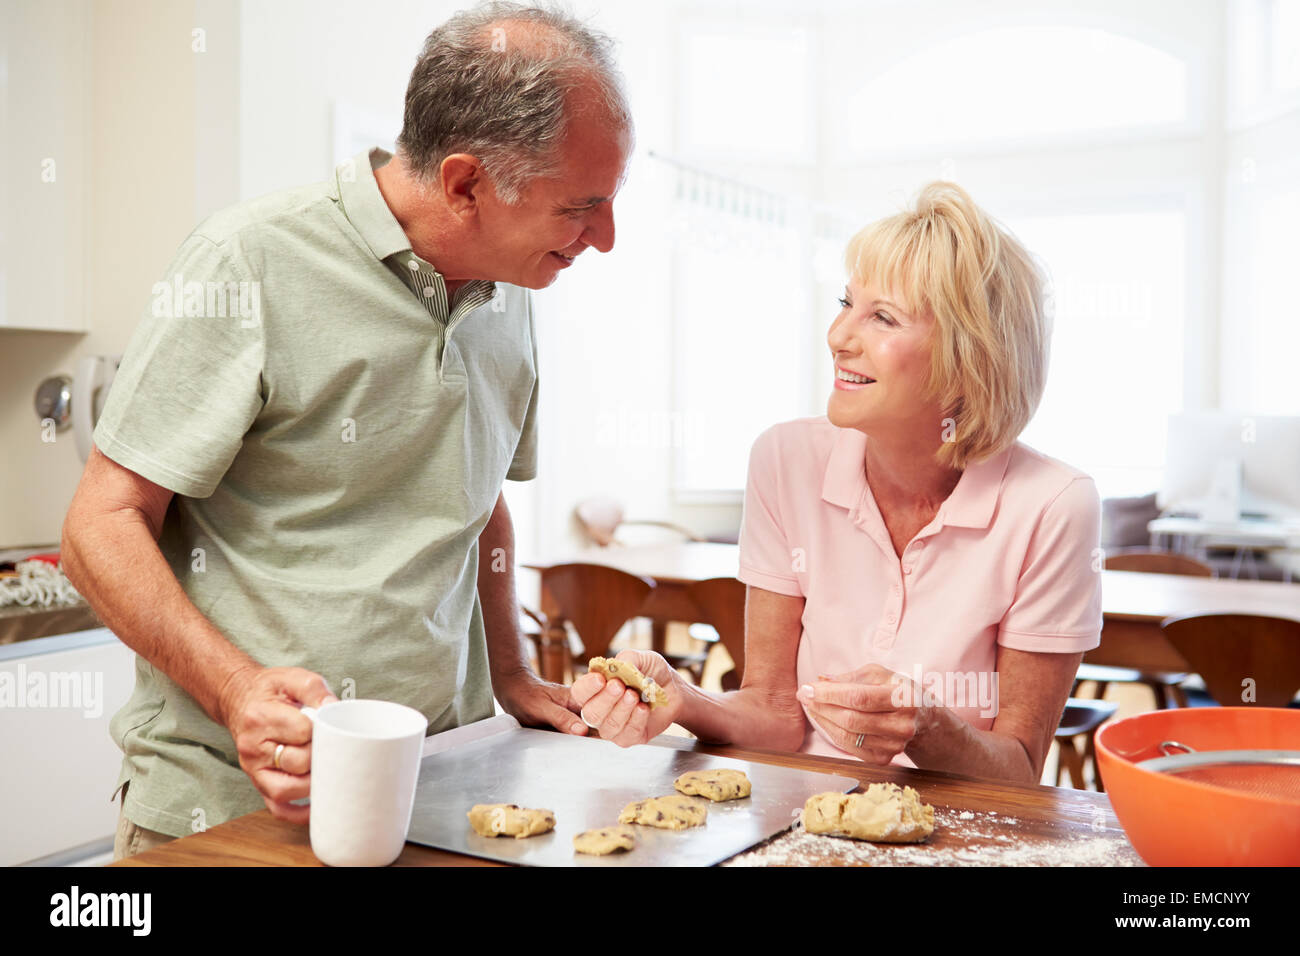 Senior Woman With Husband Baking Cookies In Kitchen Stock Photo